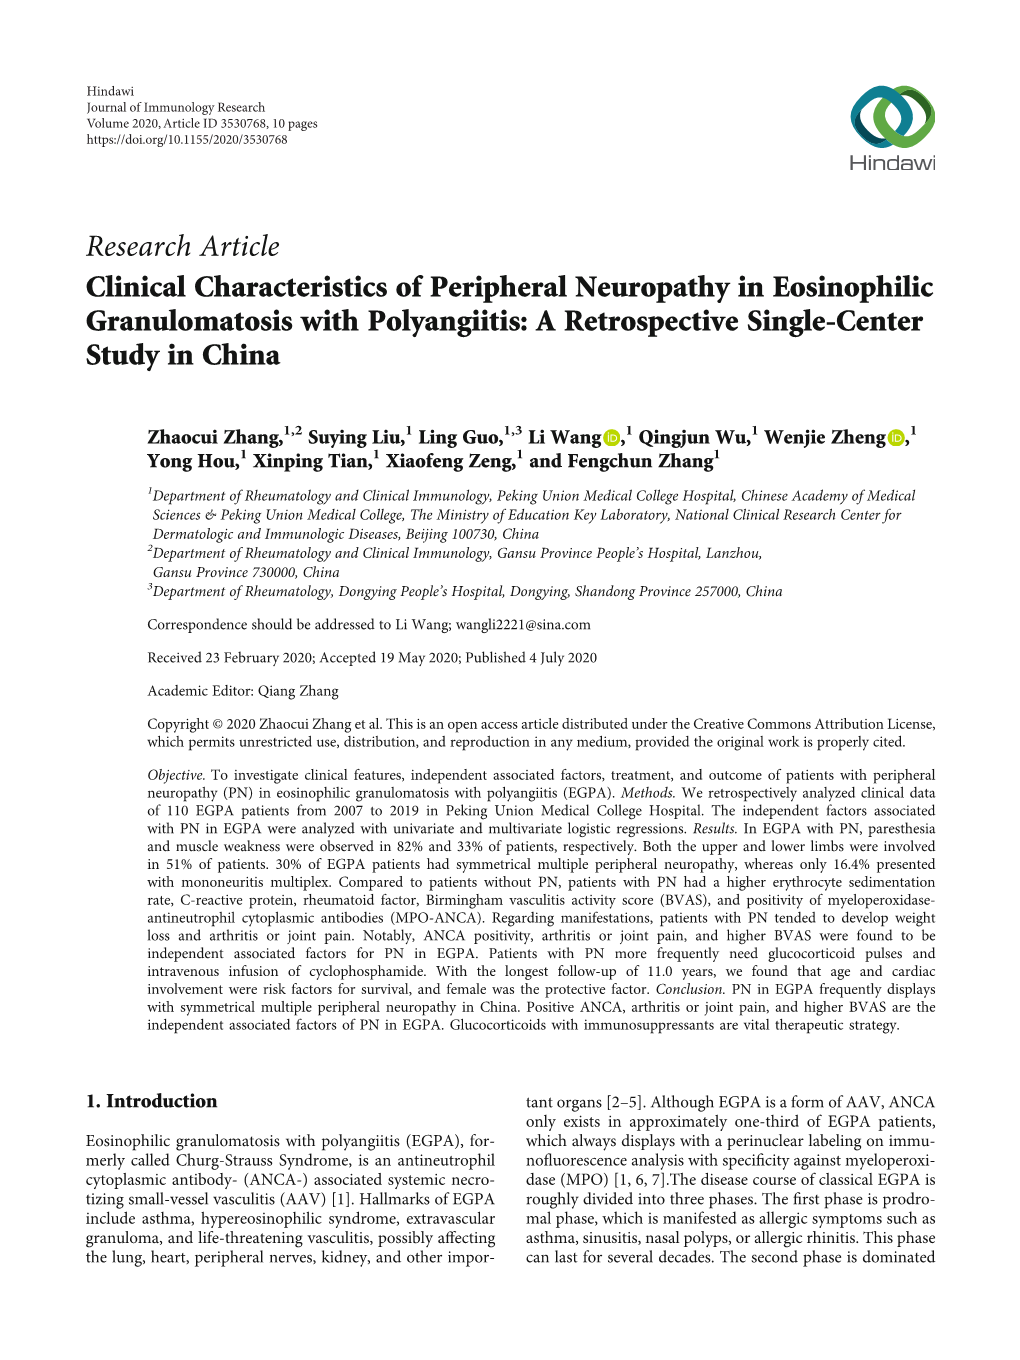 Clinical Characteristics of Peripheral Neuropathy in Eosinophilic Granulomatosis with Polyangiitis: a Retrospective Single-Center Study in China